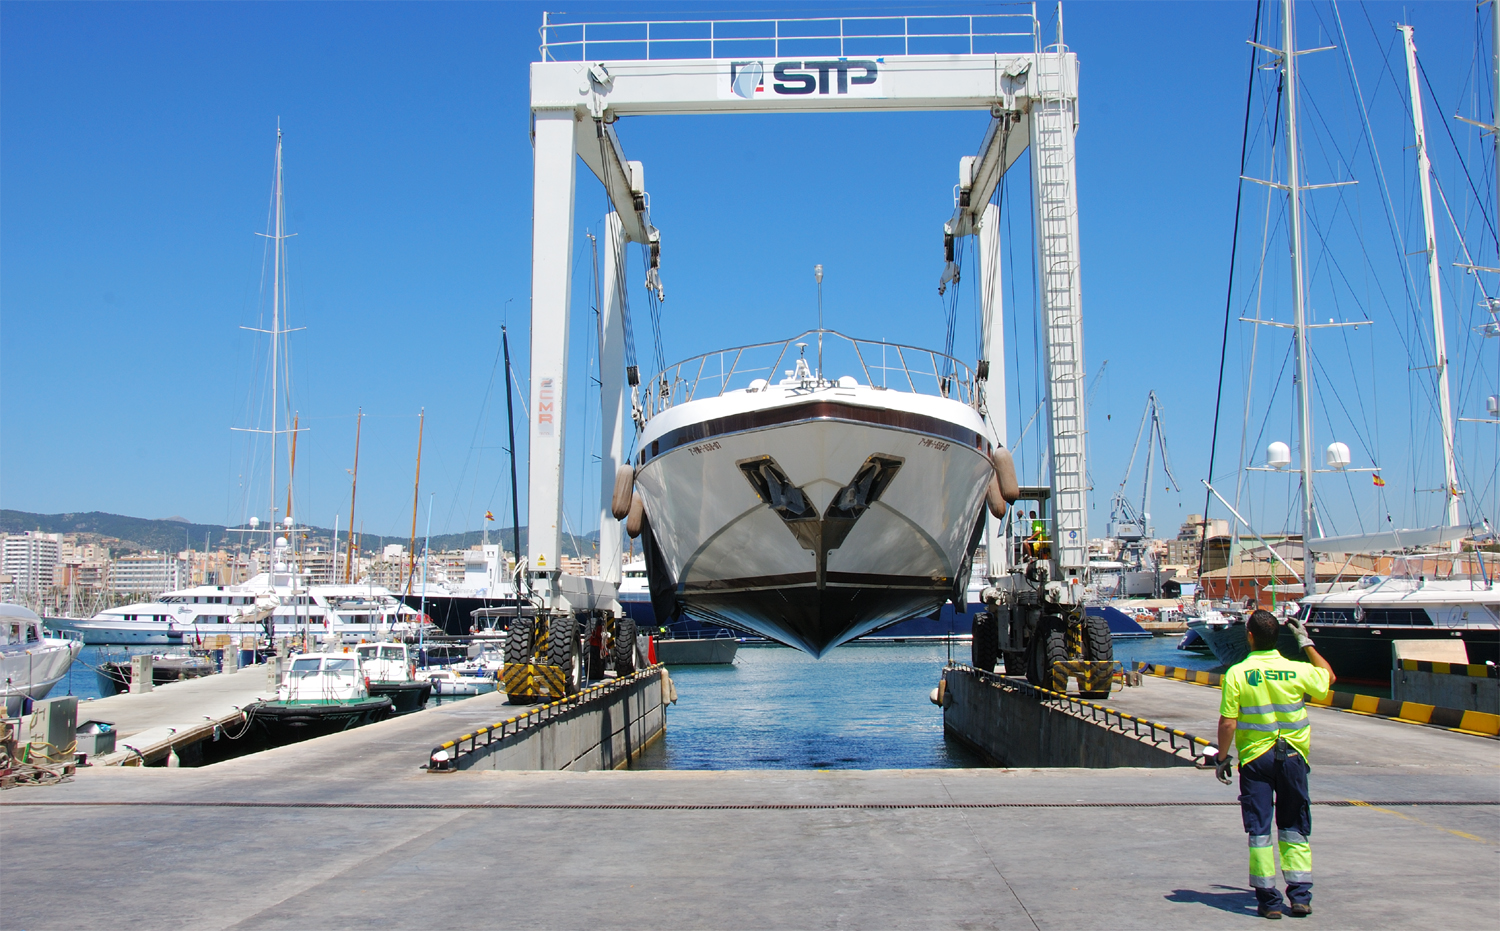 The ship repairing and maintenance companies are at the head of the Balearic sector